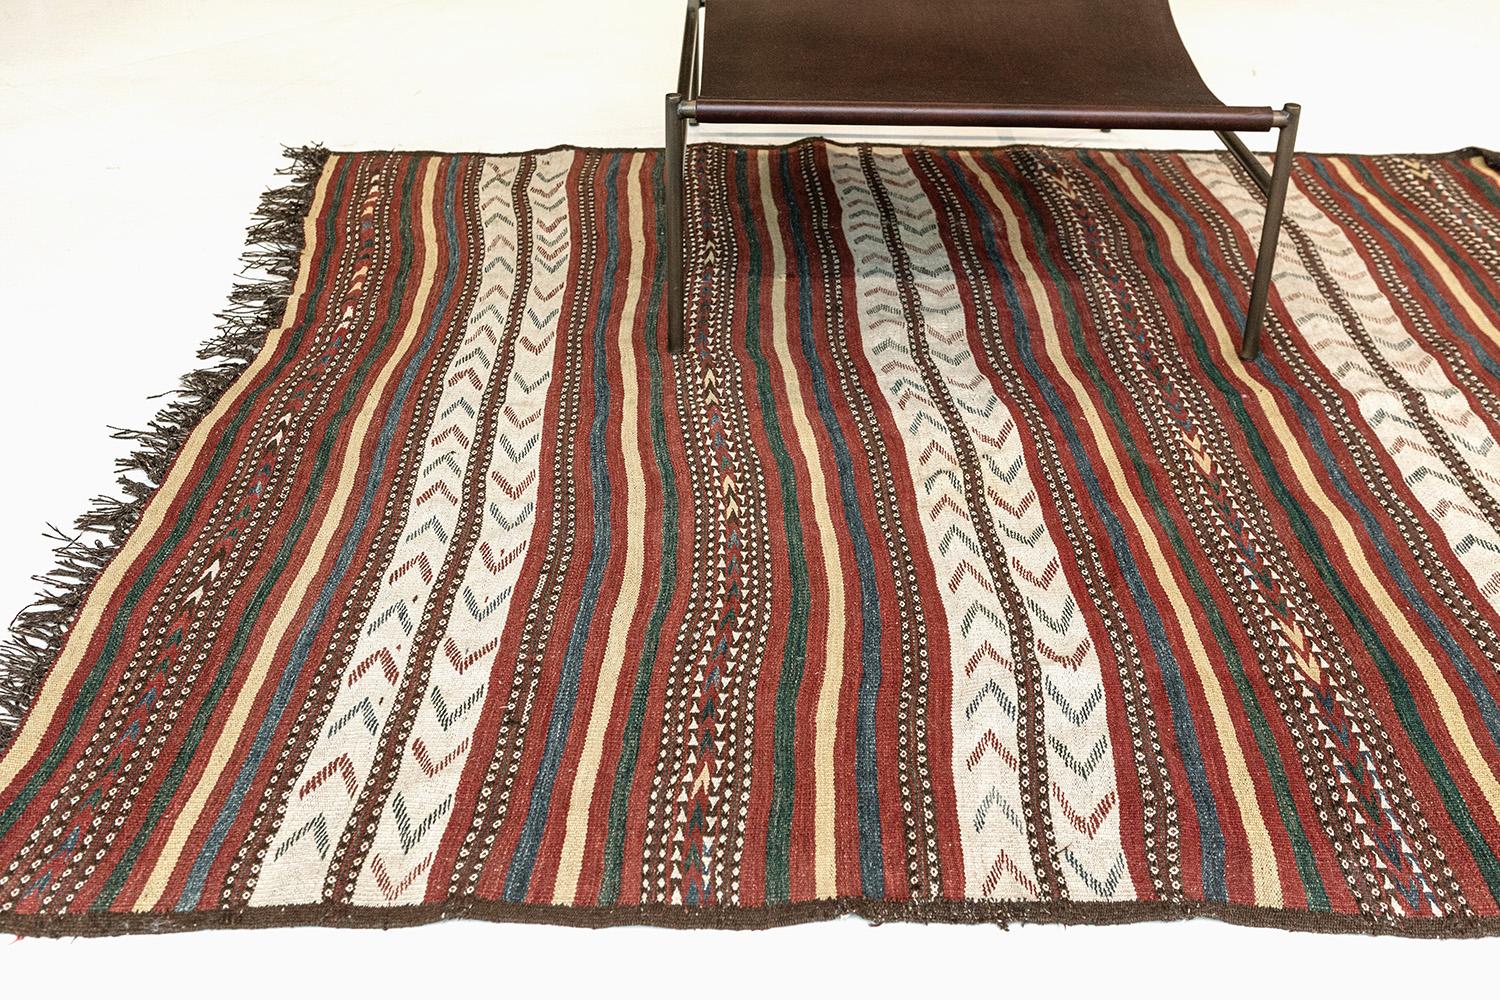 A handspun wool Uzbek Kilim stunned by double-arrowed motifs, divided with zig-zap stripes, and alternating chevrons into all-natural dyed vibrant colors. All fringes on the side are meticulously sewn and matches with the primitive texture and rich